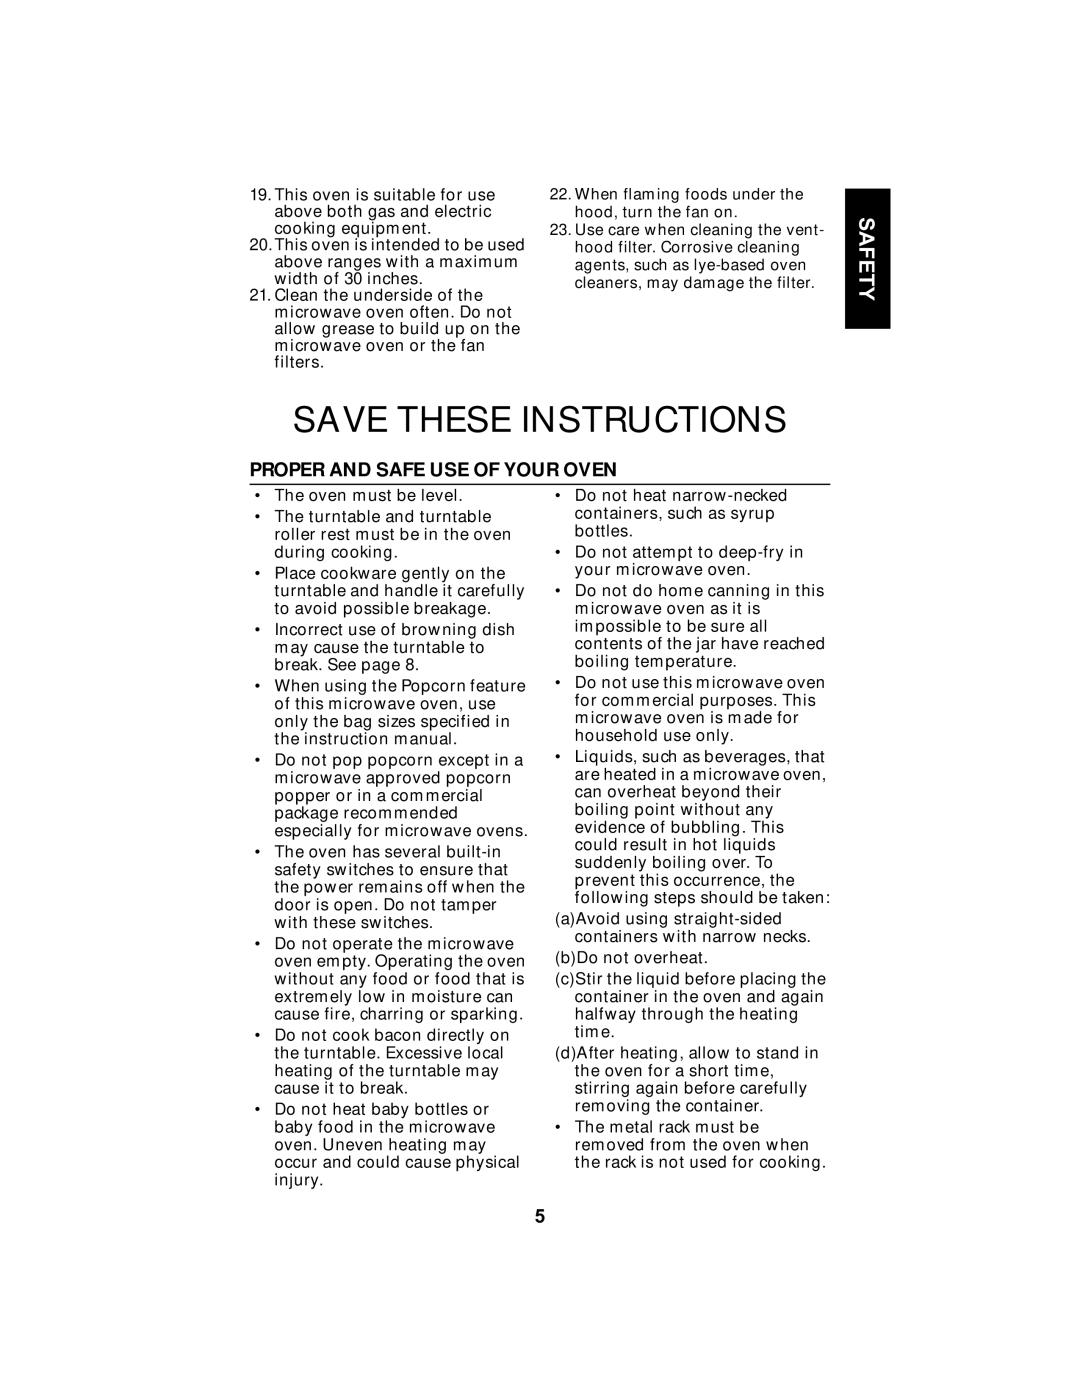 Maytag MMV5100AA manual Proper And Safe Use Of Your Oven, Save These Instructions, Safety 